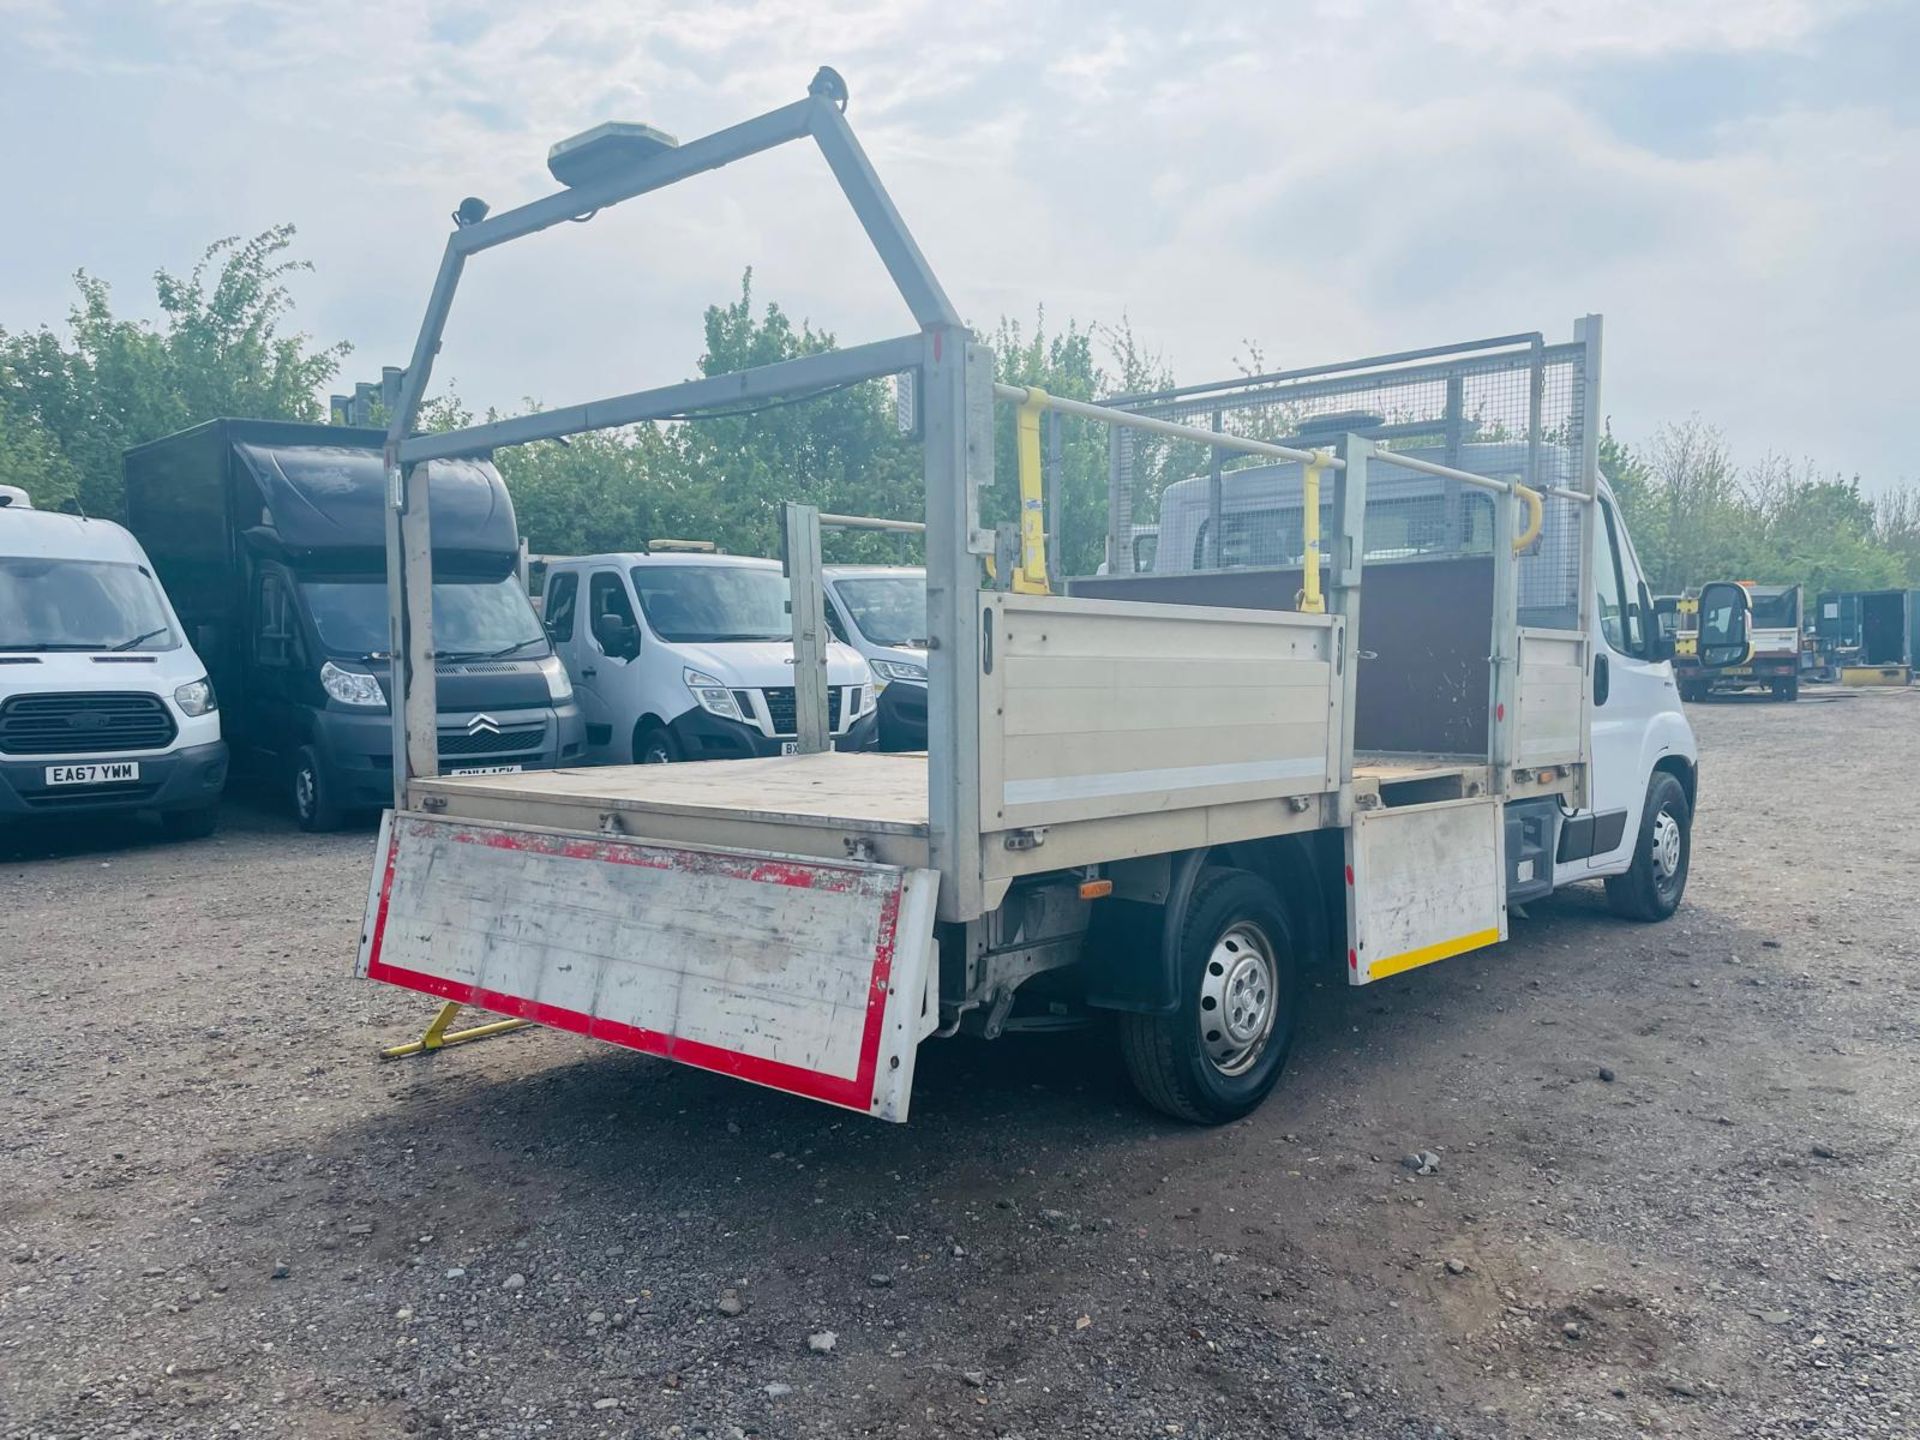 Fiat Ducato 35 Maxi 2.3 MultiJet 130 L3H1 Dropside 2019 '69 Reg'-1 Former keepers - Only 76,029 - Image 10 of 27